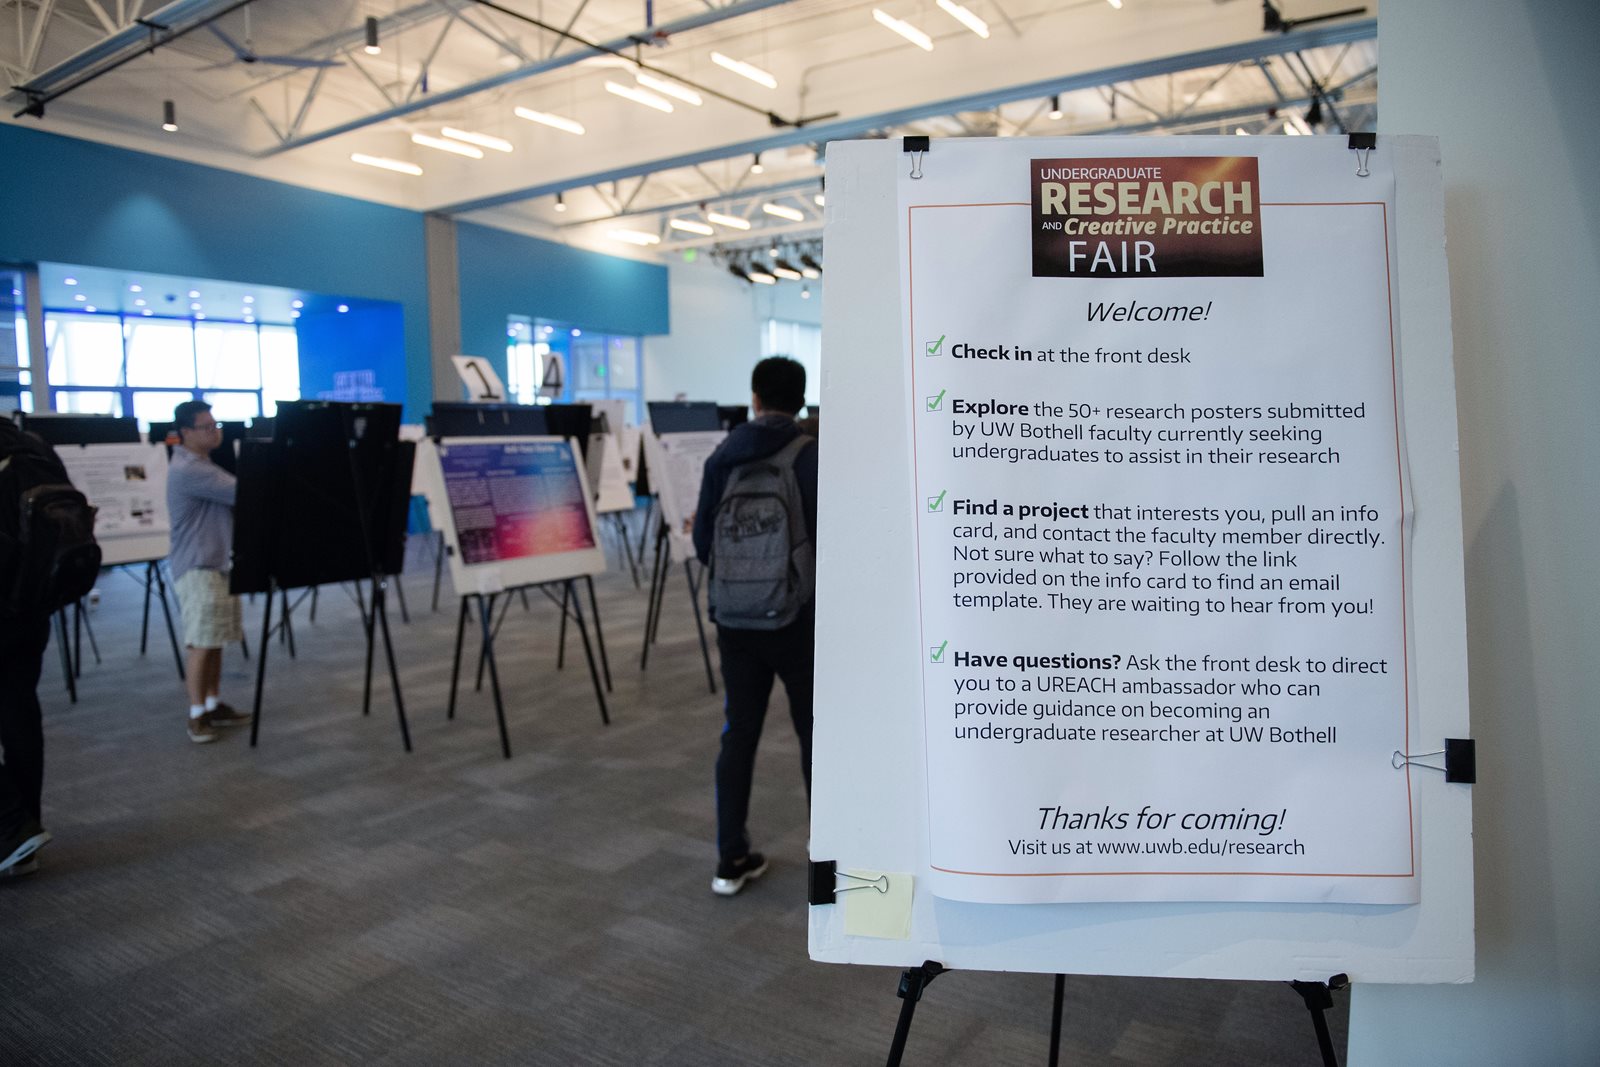 Welcome to the Undergraduate Research Fair